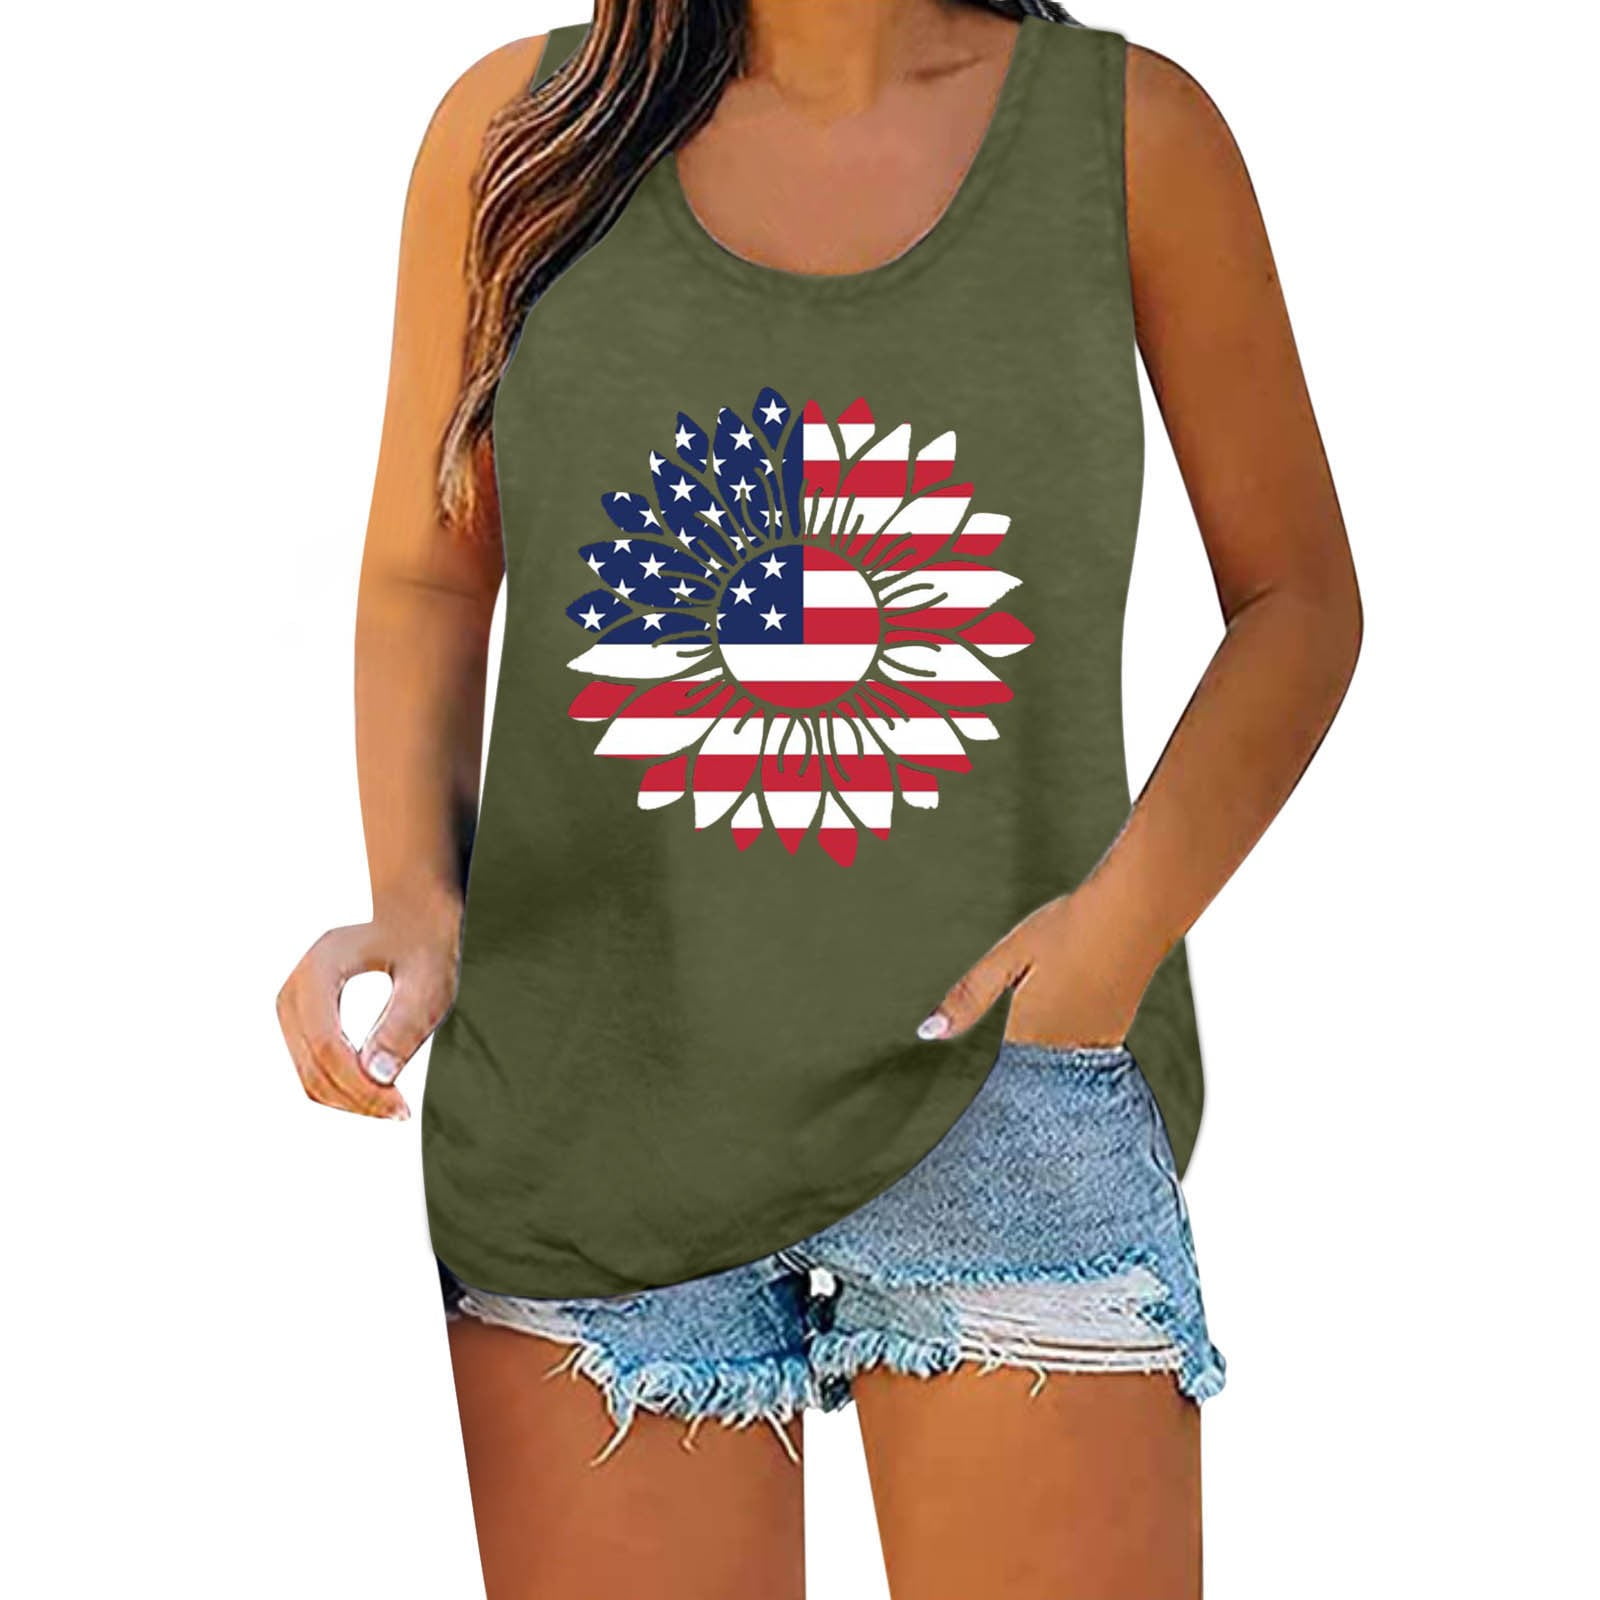 adviicd Tank Top For Women Women's Adjustable Spaghetti Strap Double Lined  Seamless sole Tank Yoga Crop Tops Army Green XXL 